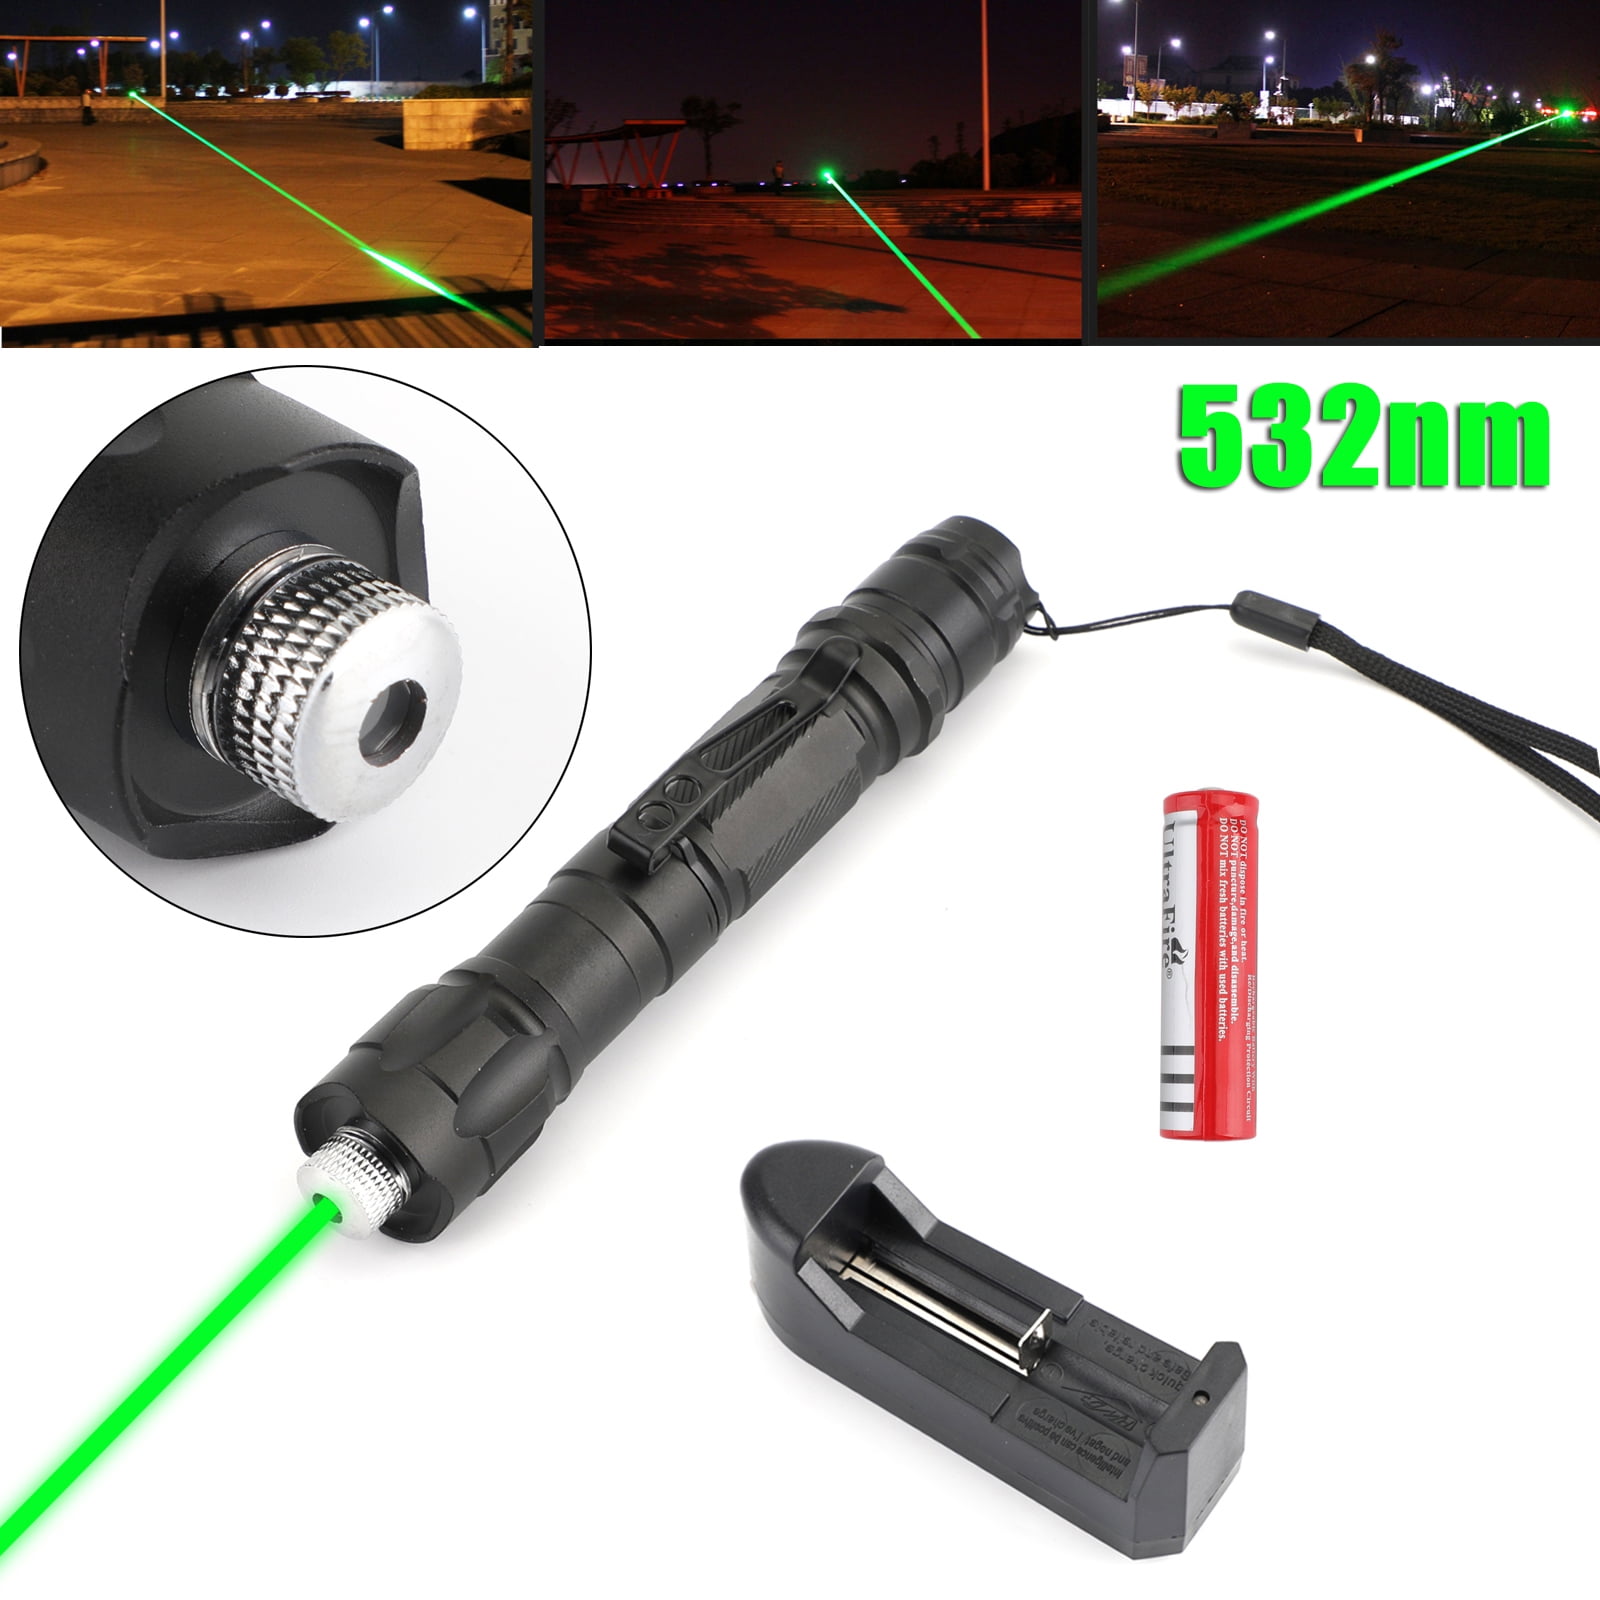 2in1 Lazer Lamp USB Rechargeable Red Laser Pointer Pen Visible Beam Lights 